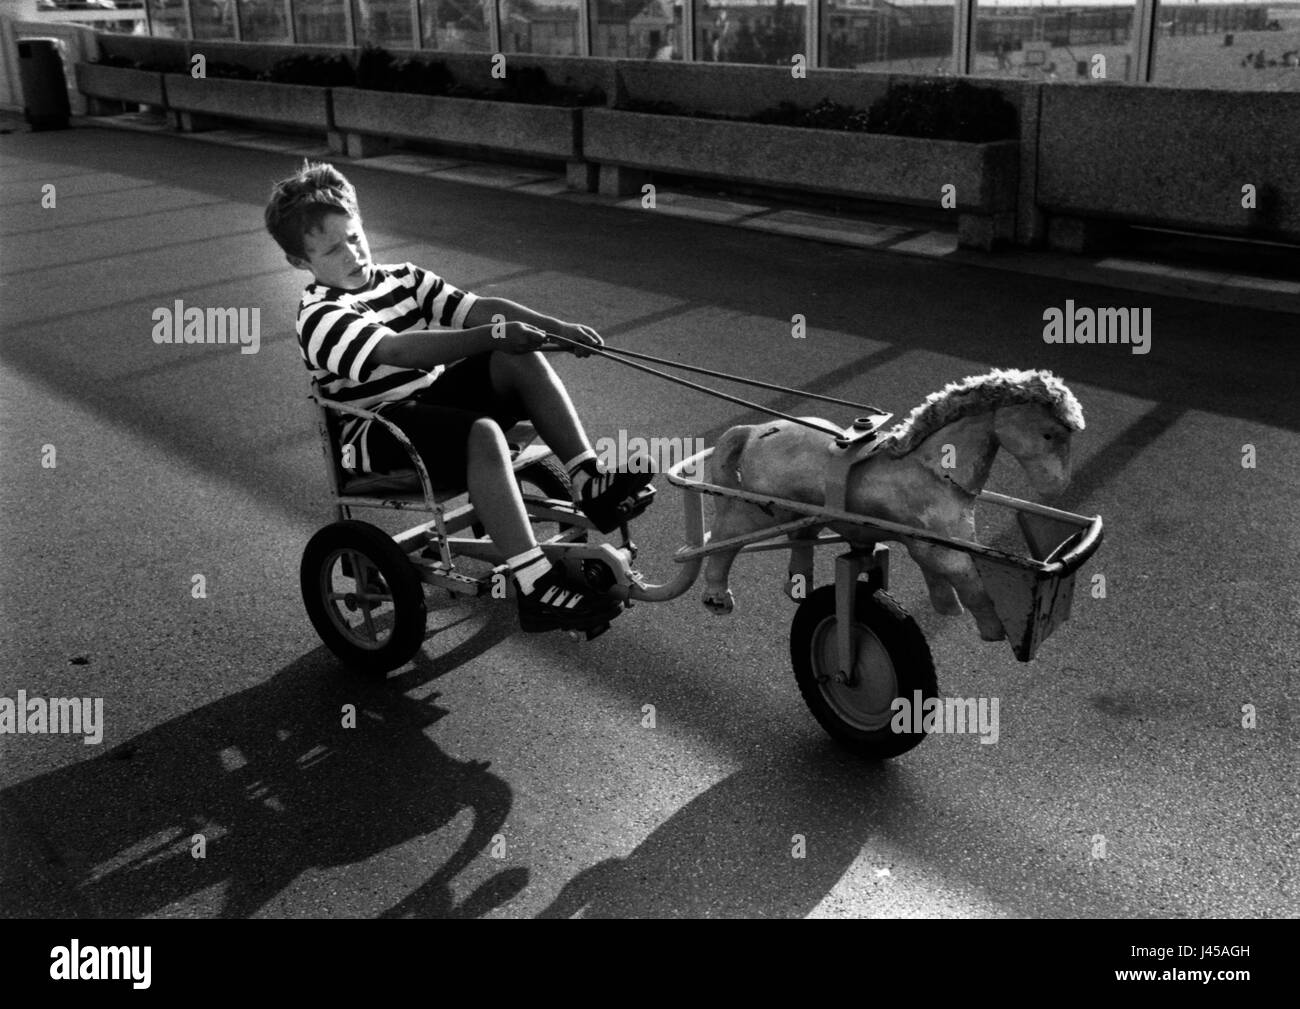 AJAXNETPHOTO. 1996. LE TOUQUET, FRANCE. - CHARIOT RACER - YOUNGSTER IN A PEDAL DRIVEN CHARIOT BUGGY ON THE PROMENADE. PHOTO:JONATHAN EASTLAND/AJAX REF:960308 Stock Photo